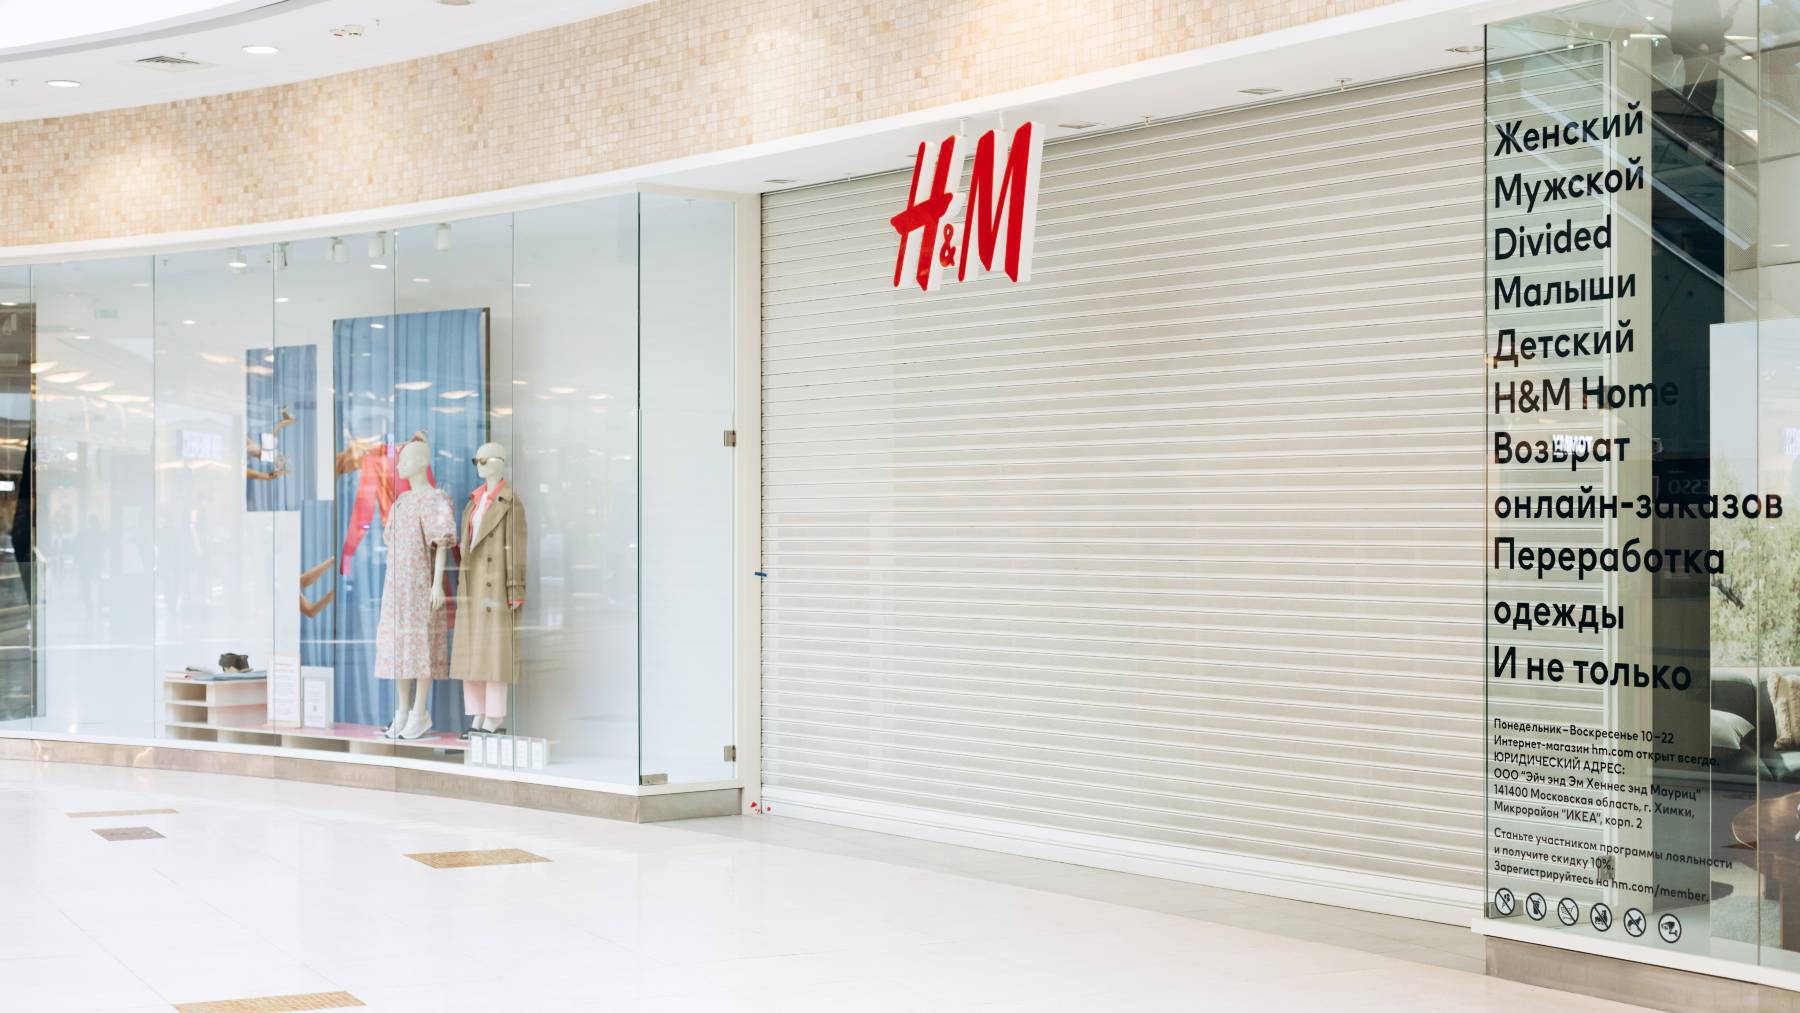 H&M became the latest retailer to permanently exit Russia this week.